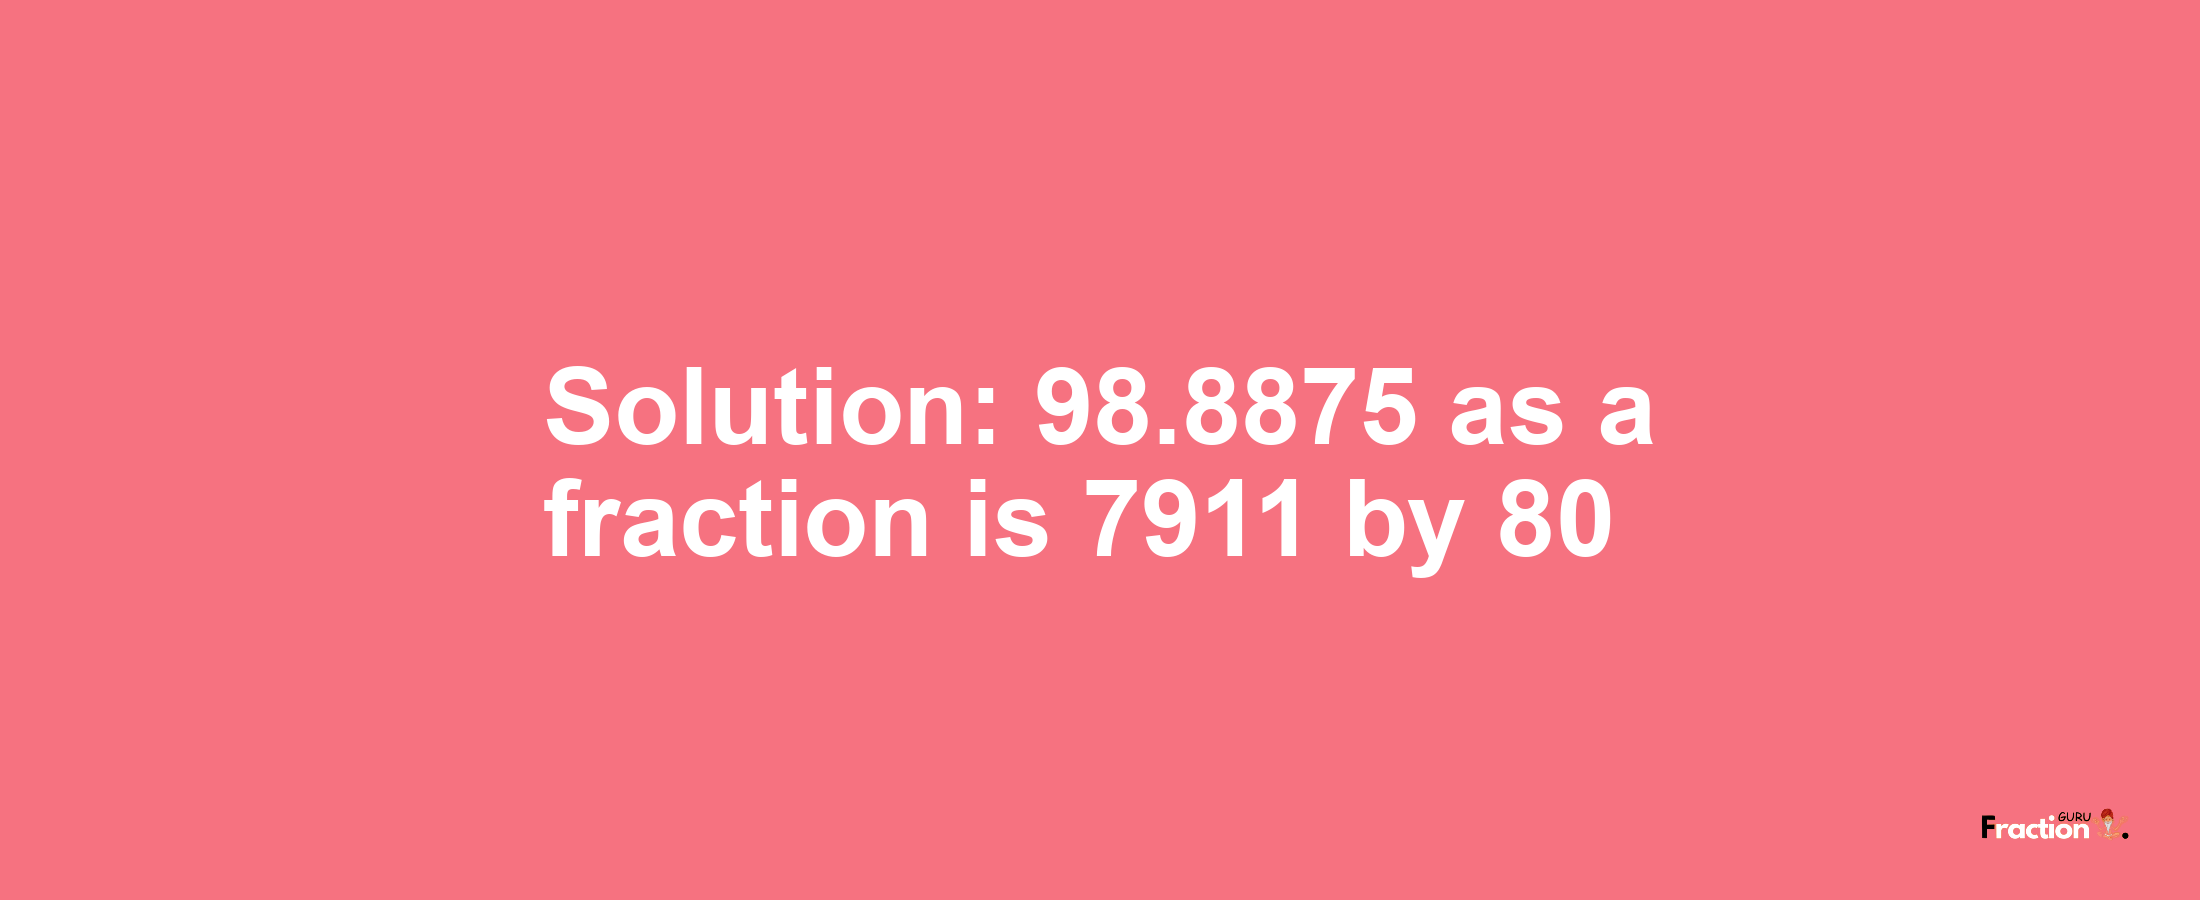 Solution:98.8875 as a fraction is 7911/80